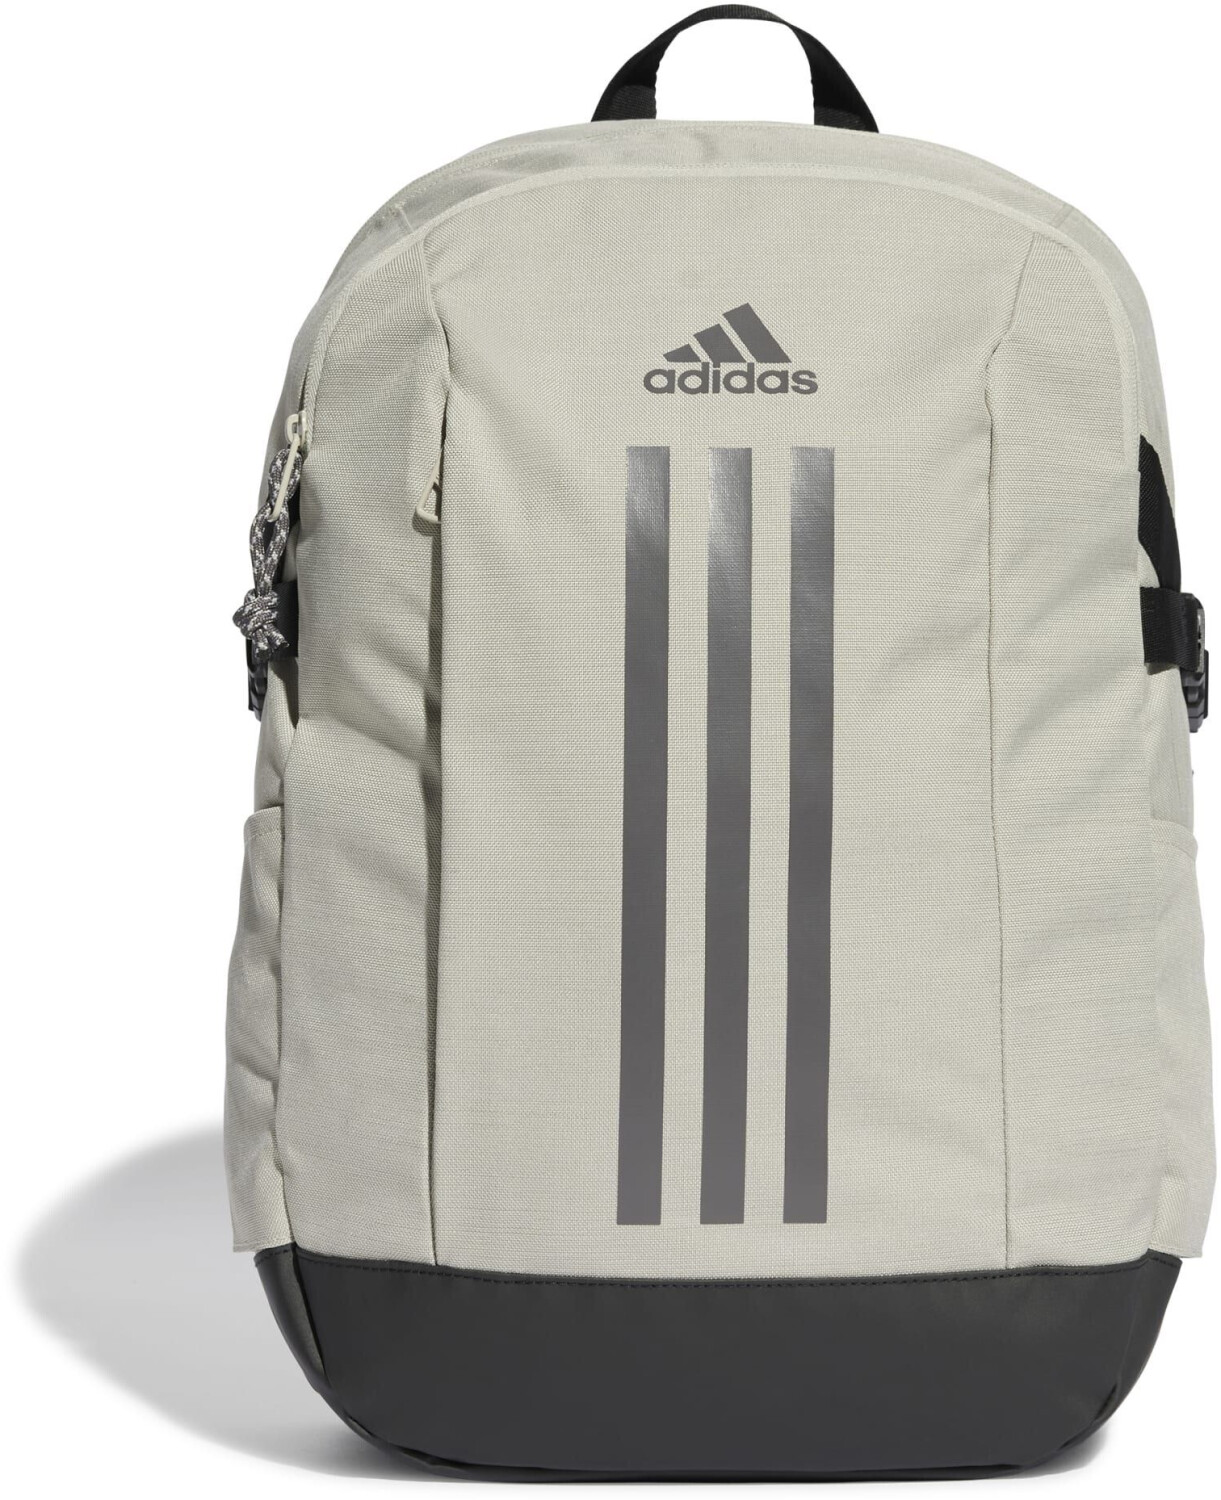 Photos - Backpack Adidas Power  Putty Grey/Charcoal  (IT5361)